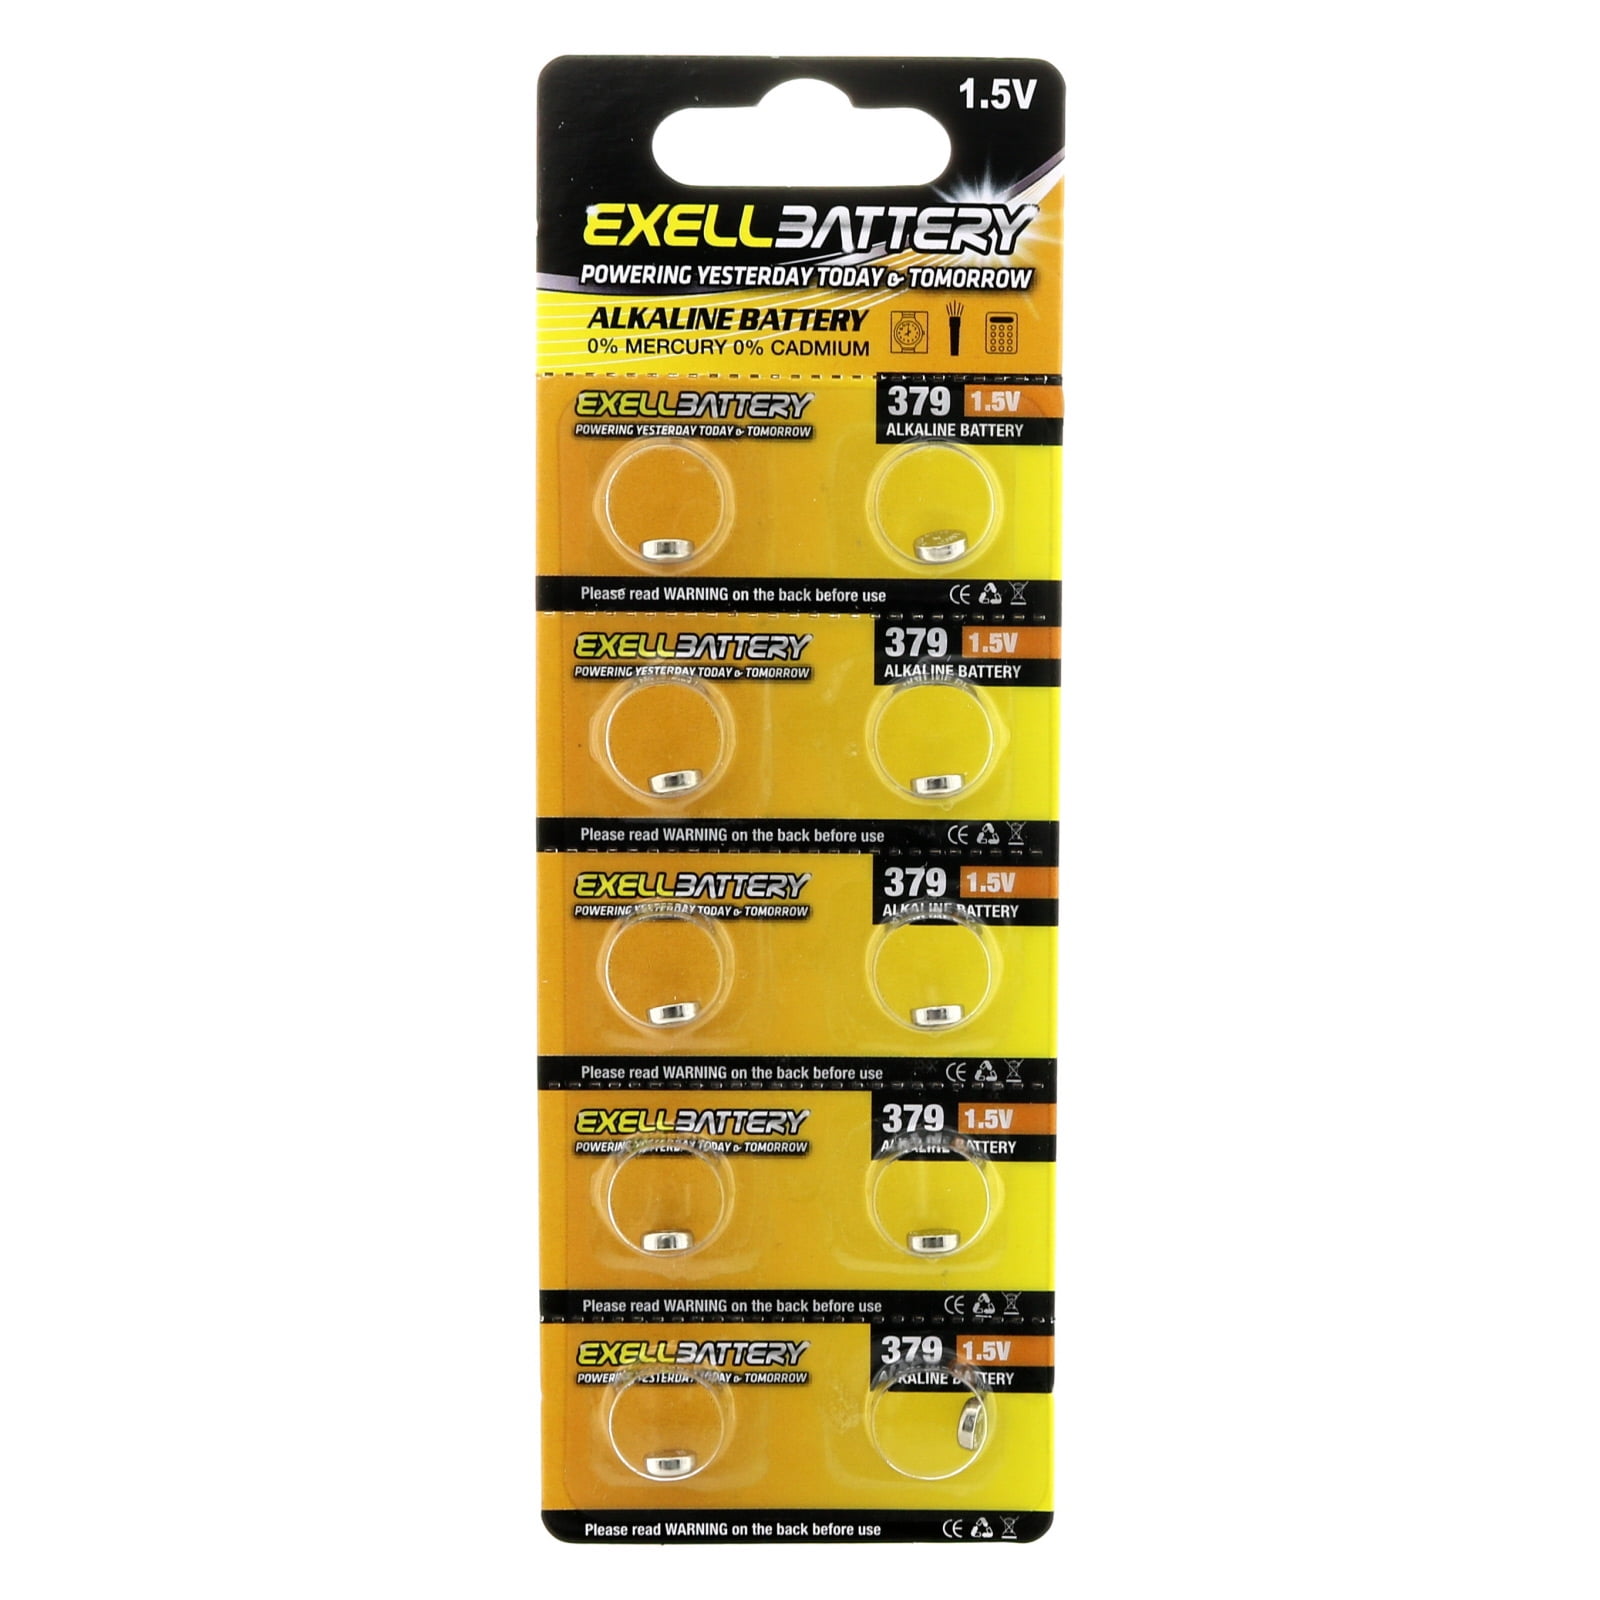 Replacement Batteries Energizer CR1620 for Cayeye, Sigma, Knog, Planet Bike  & Mnay Others. Card of 5.